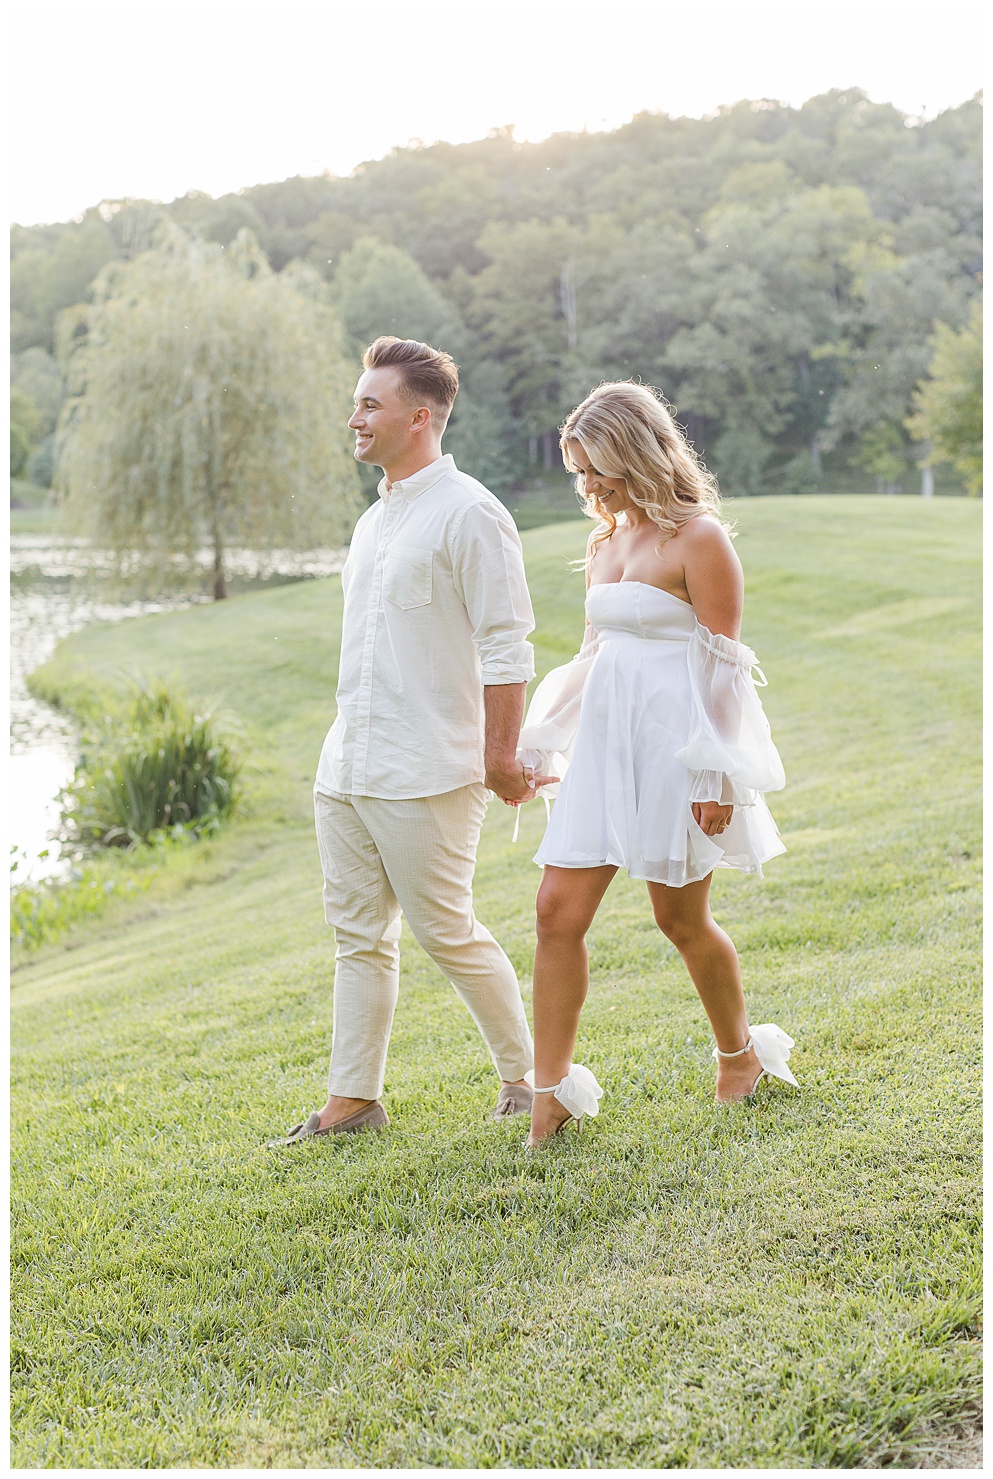 Wedding and engagement photography in Columbia Missouri and Jefferson City Missouri